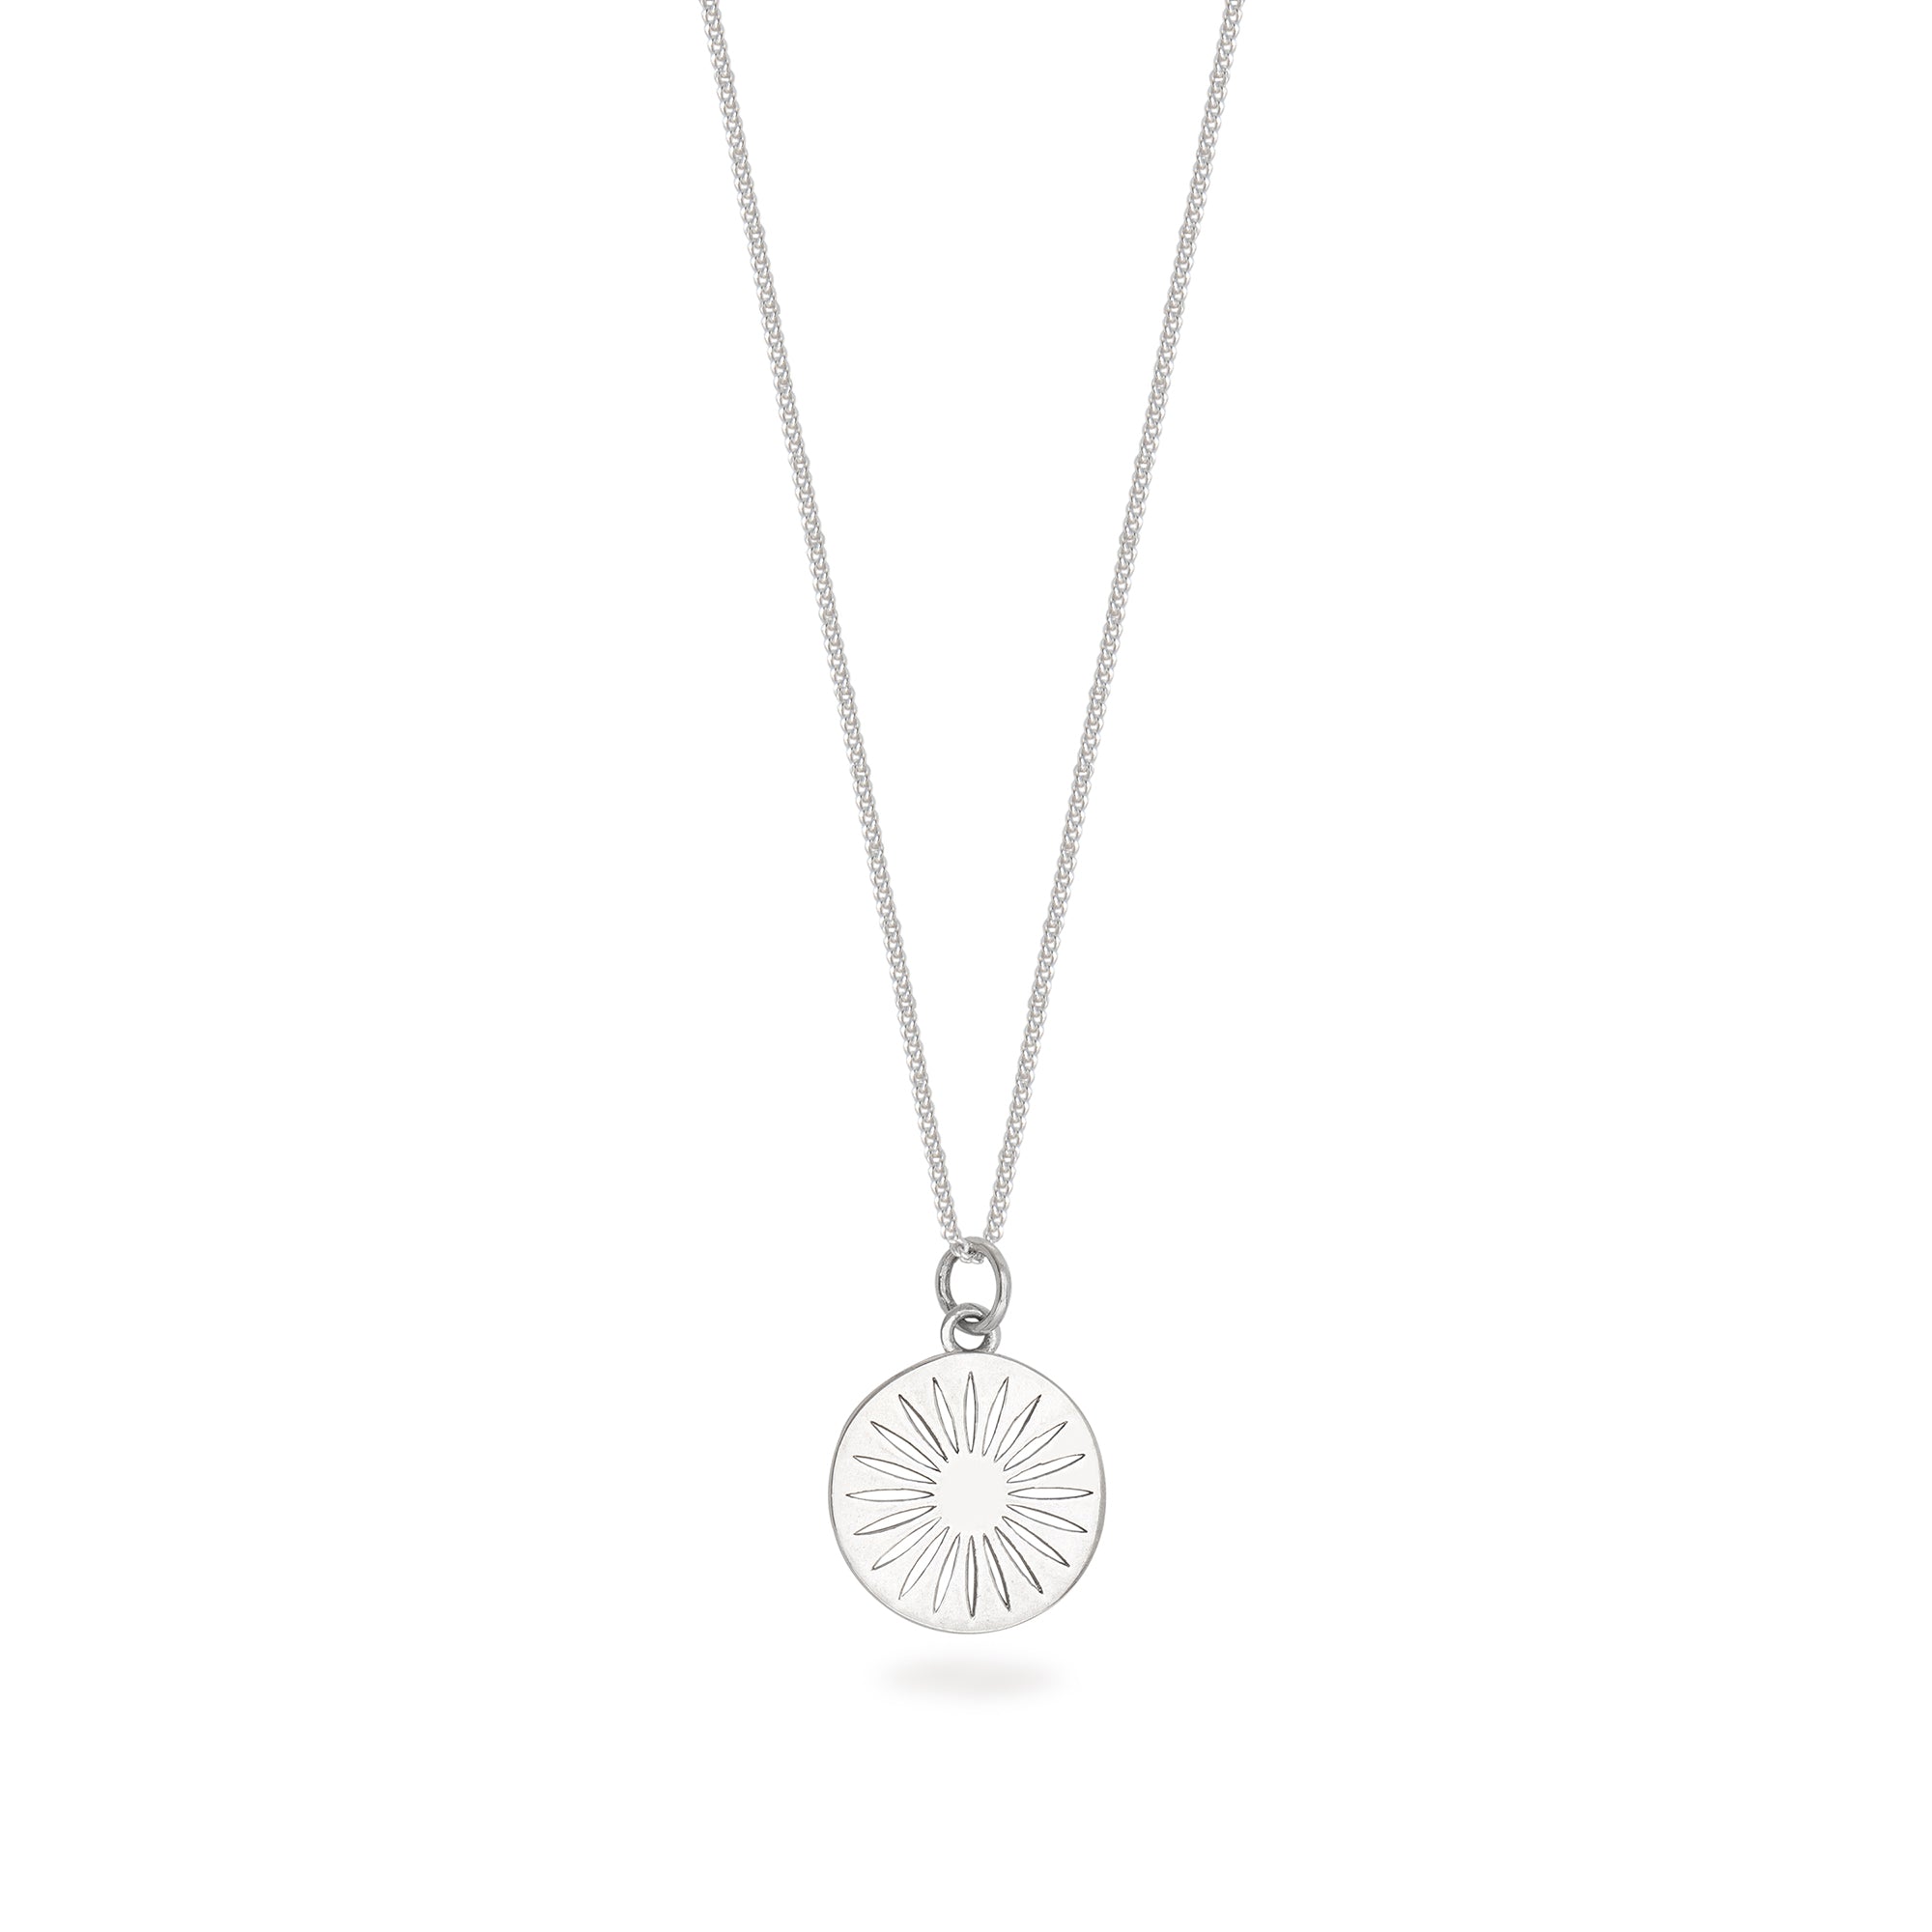 silver daisy necklace on white background 